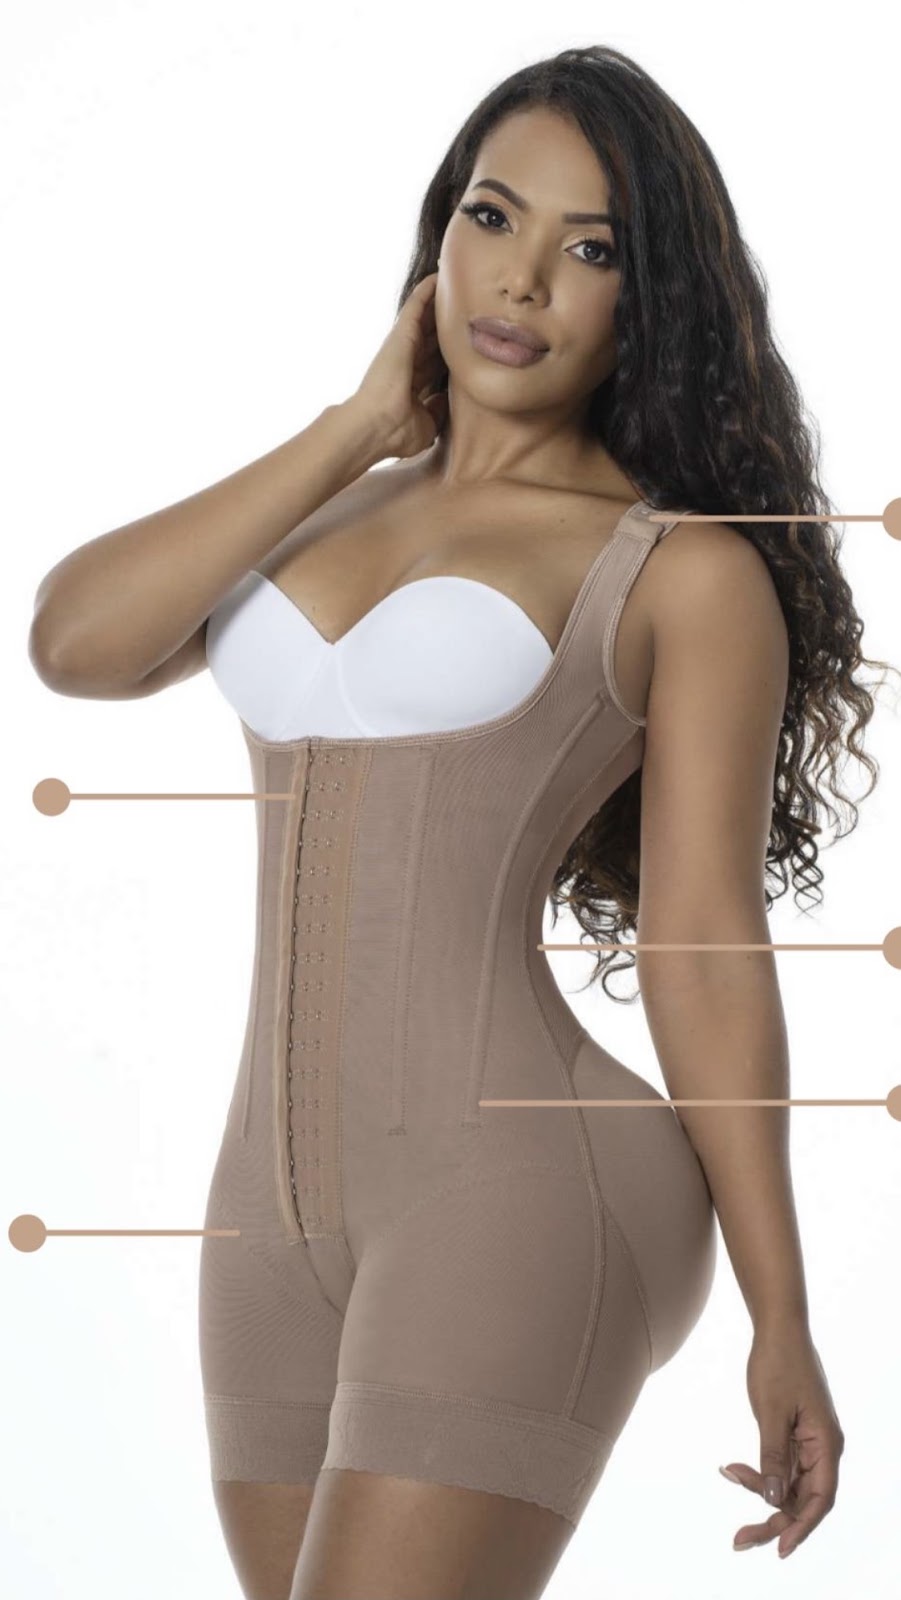 Rosys Shapers | 17409 Valley Blvd #10, Bloomington, CA 92316, USA | Phone: (800) 807-9194